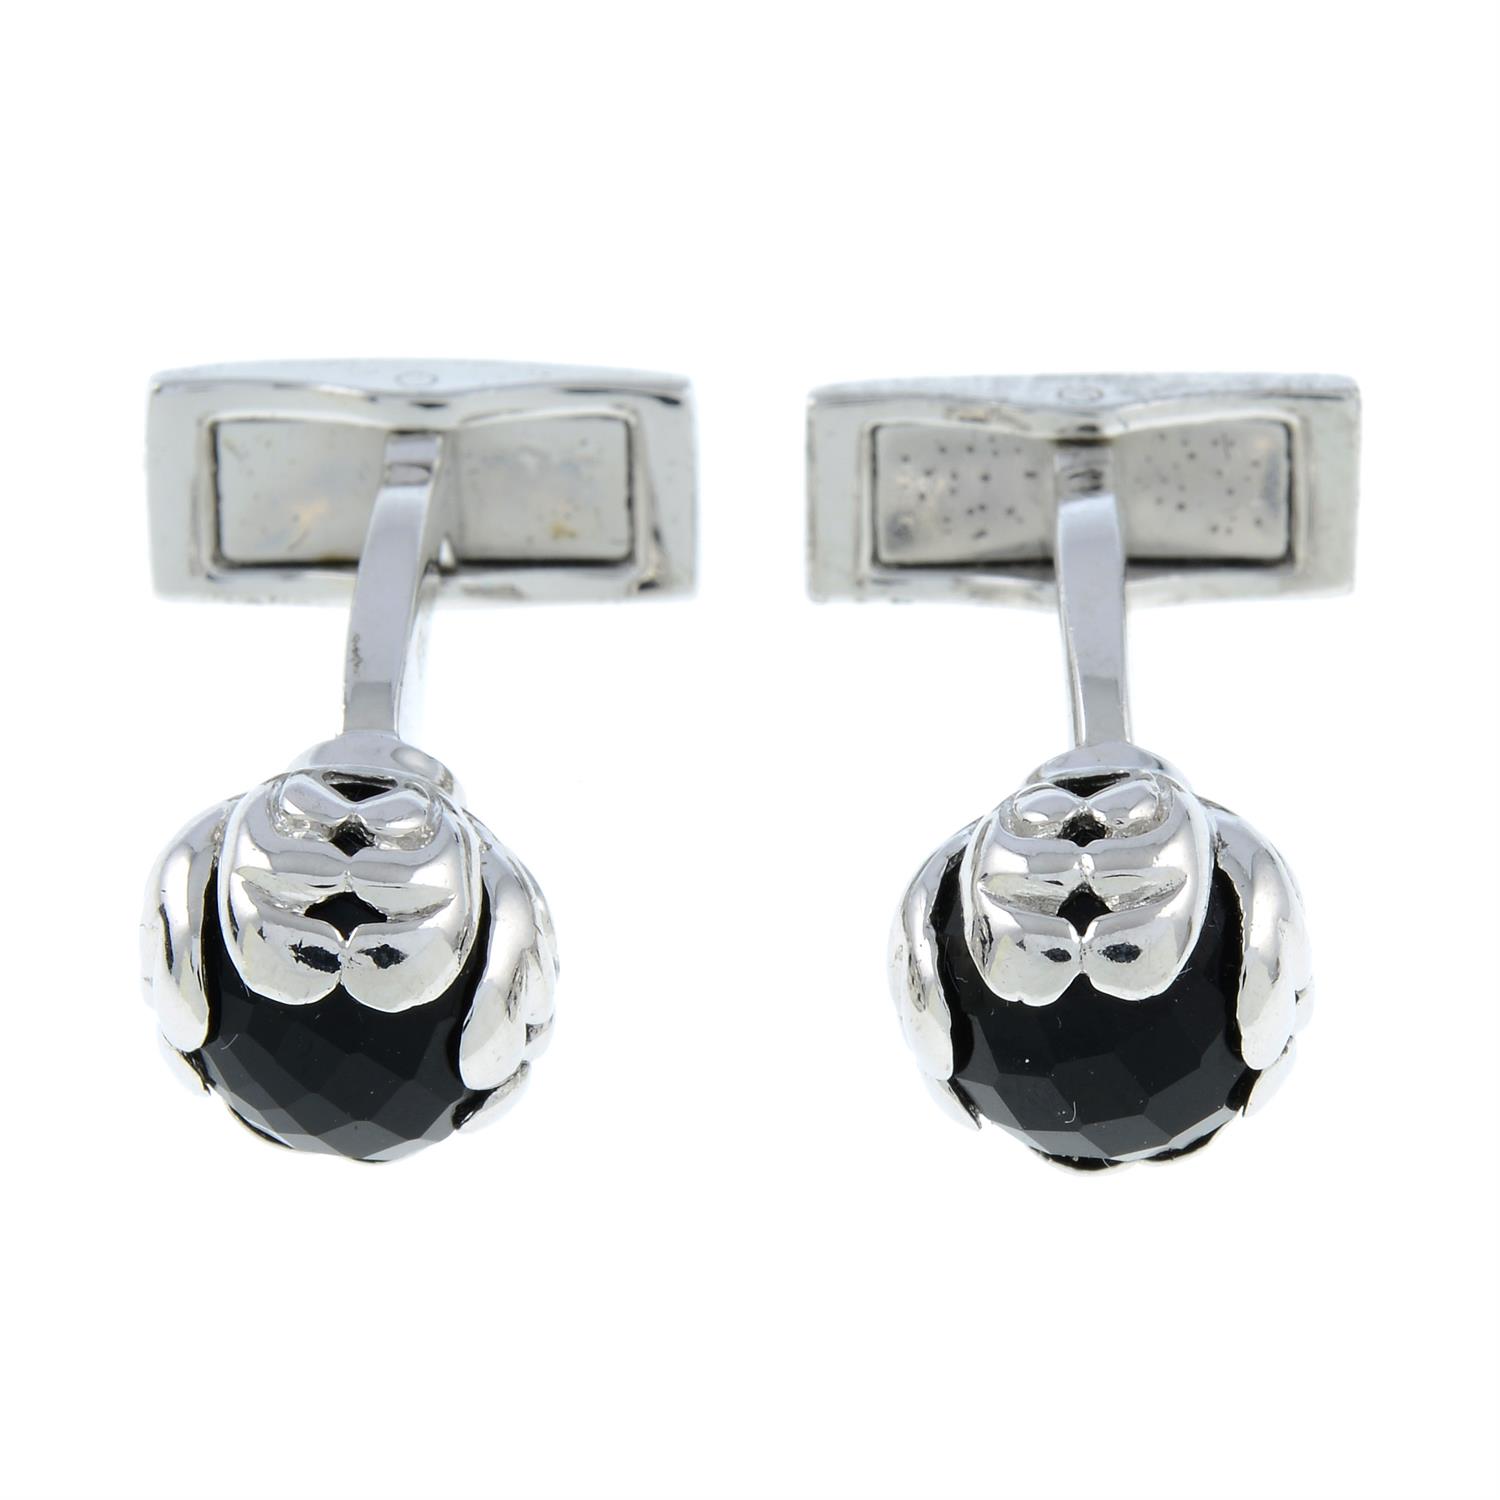 A pair of silver floral cufflinks, each with black gem accent, by P. D. Man.